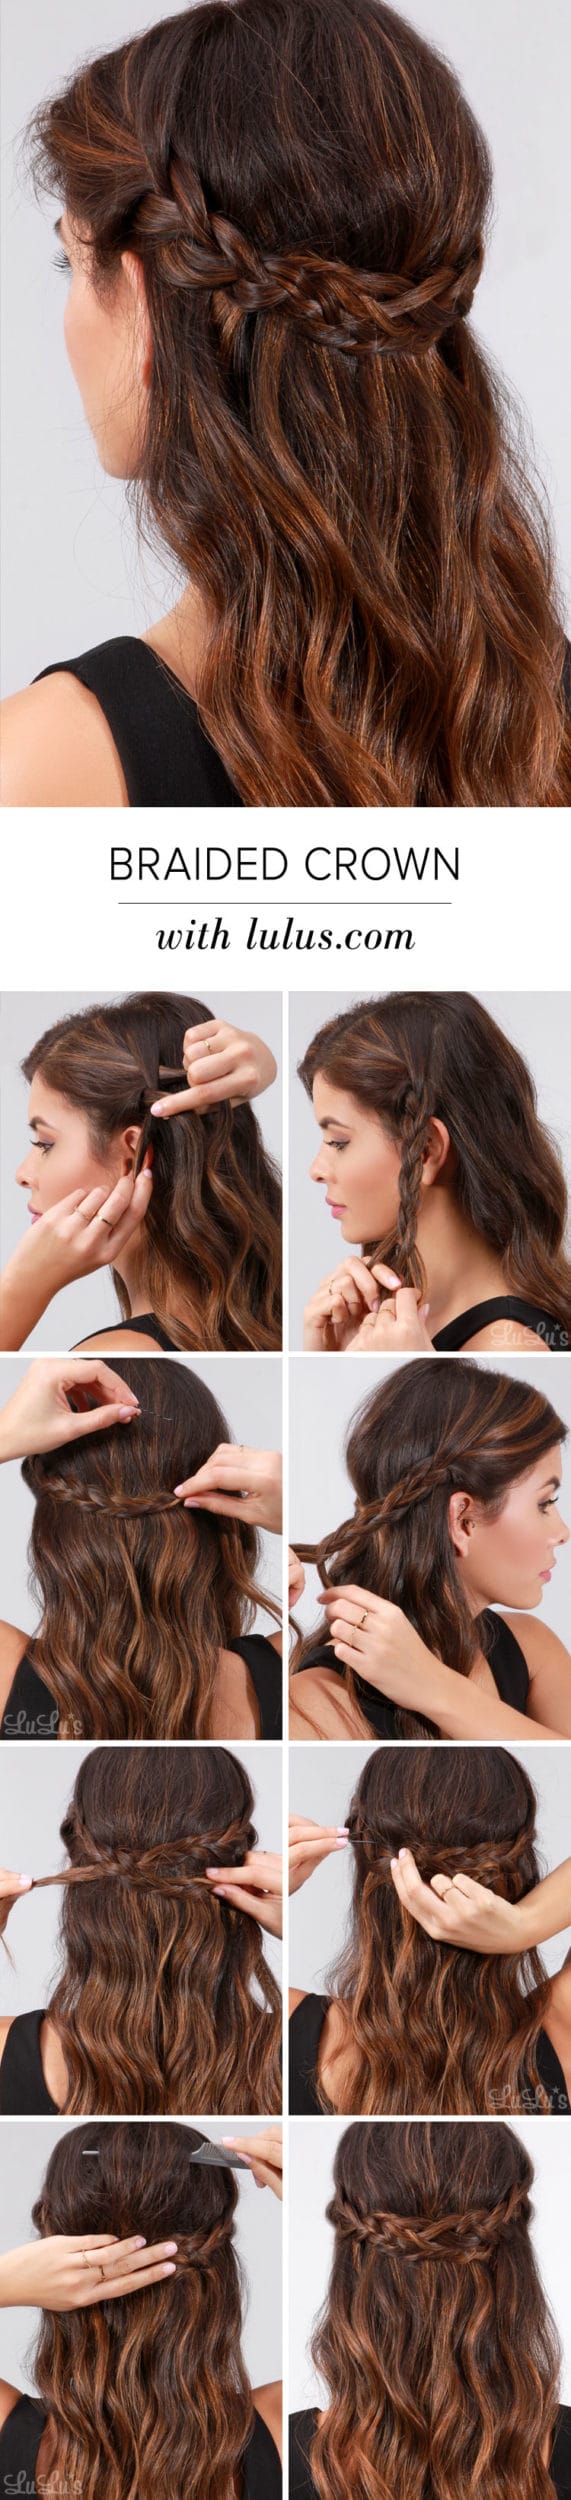 Simply Hairstyle Tutorials For Your Next Going Out